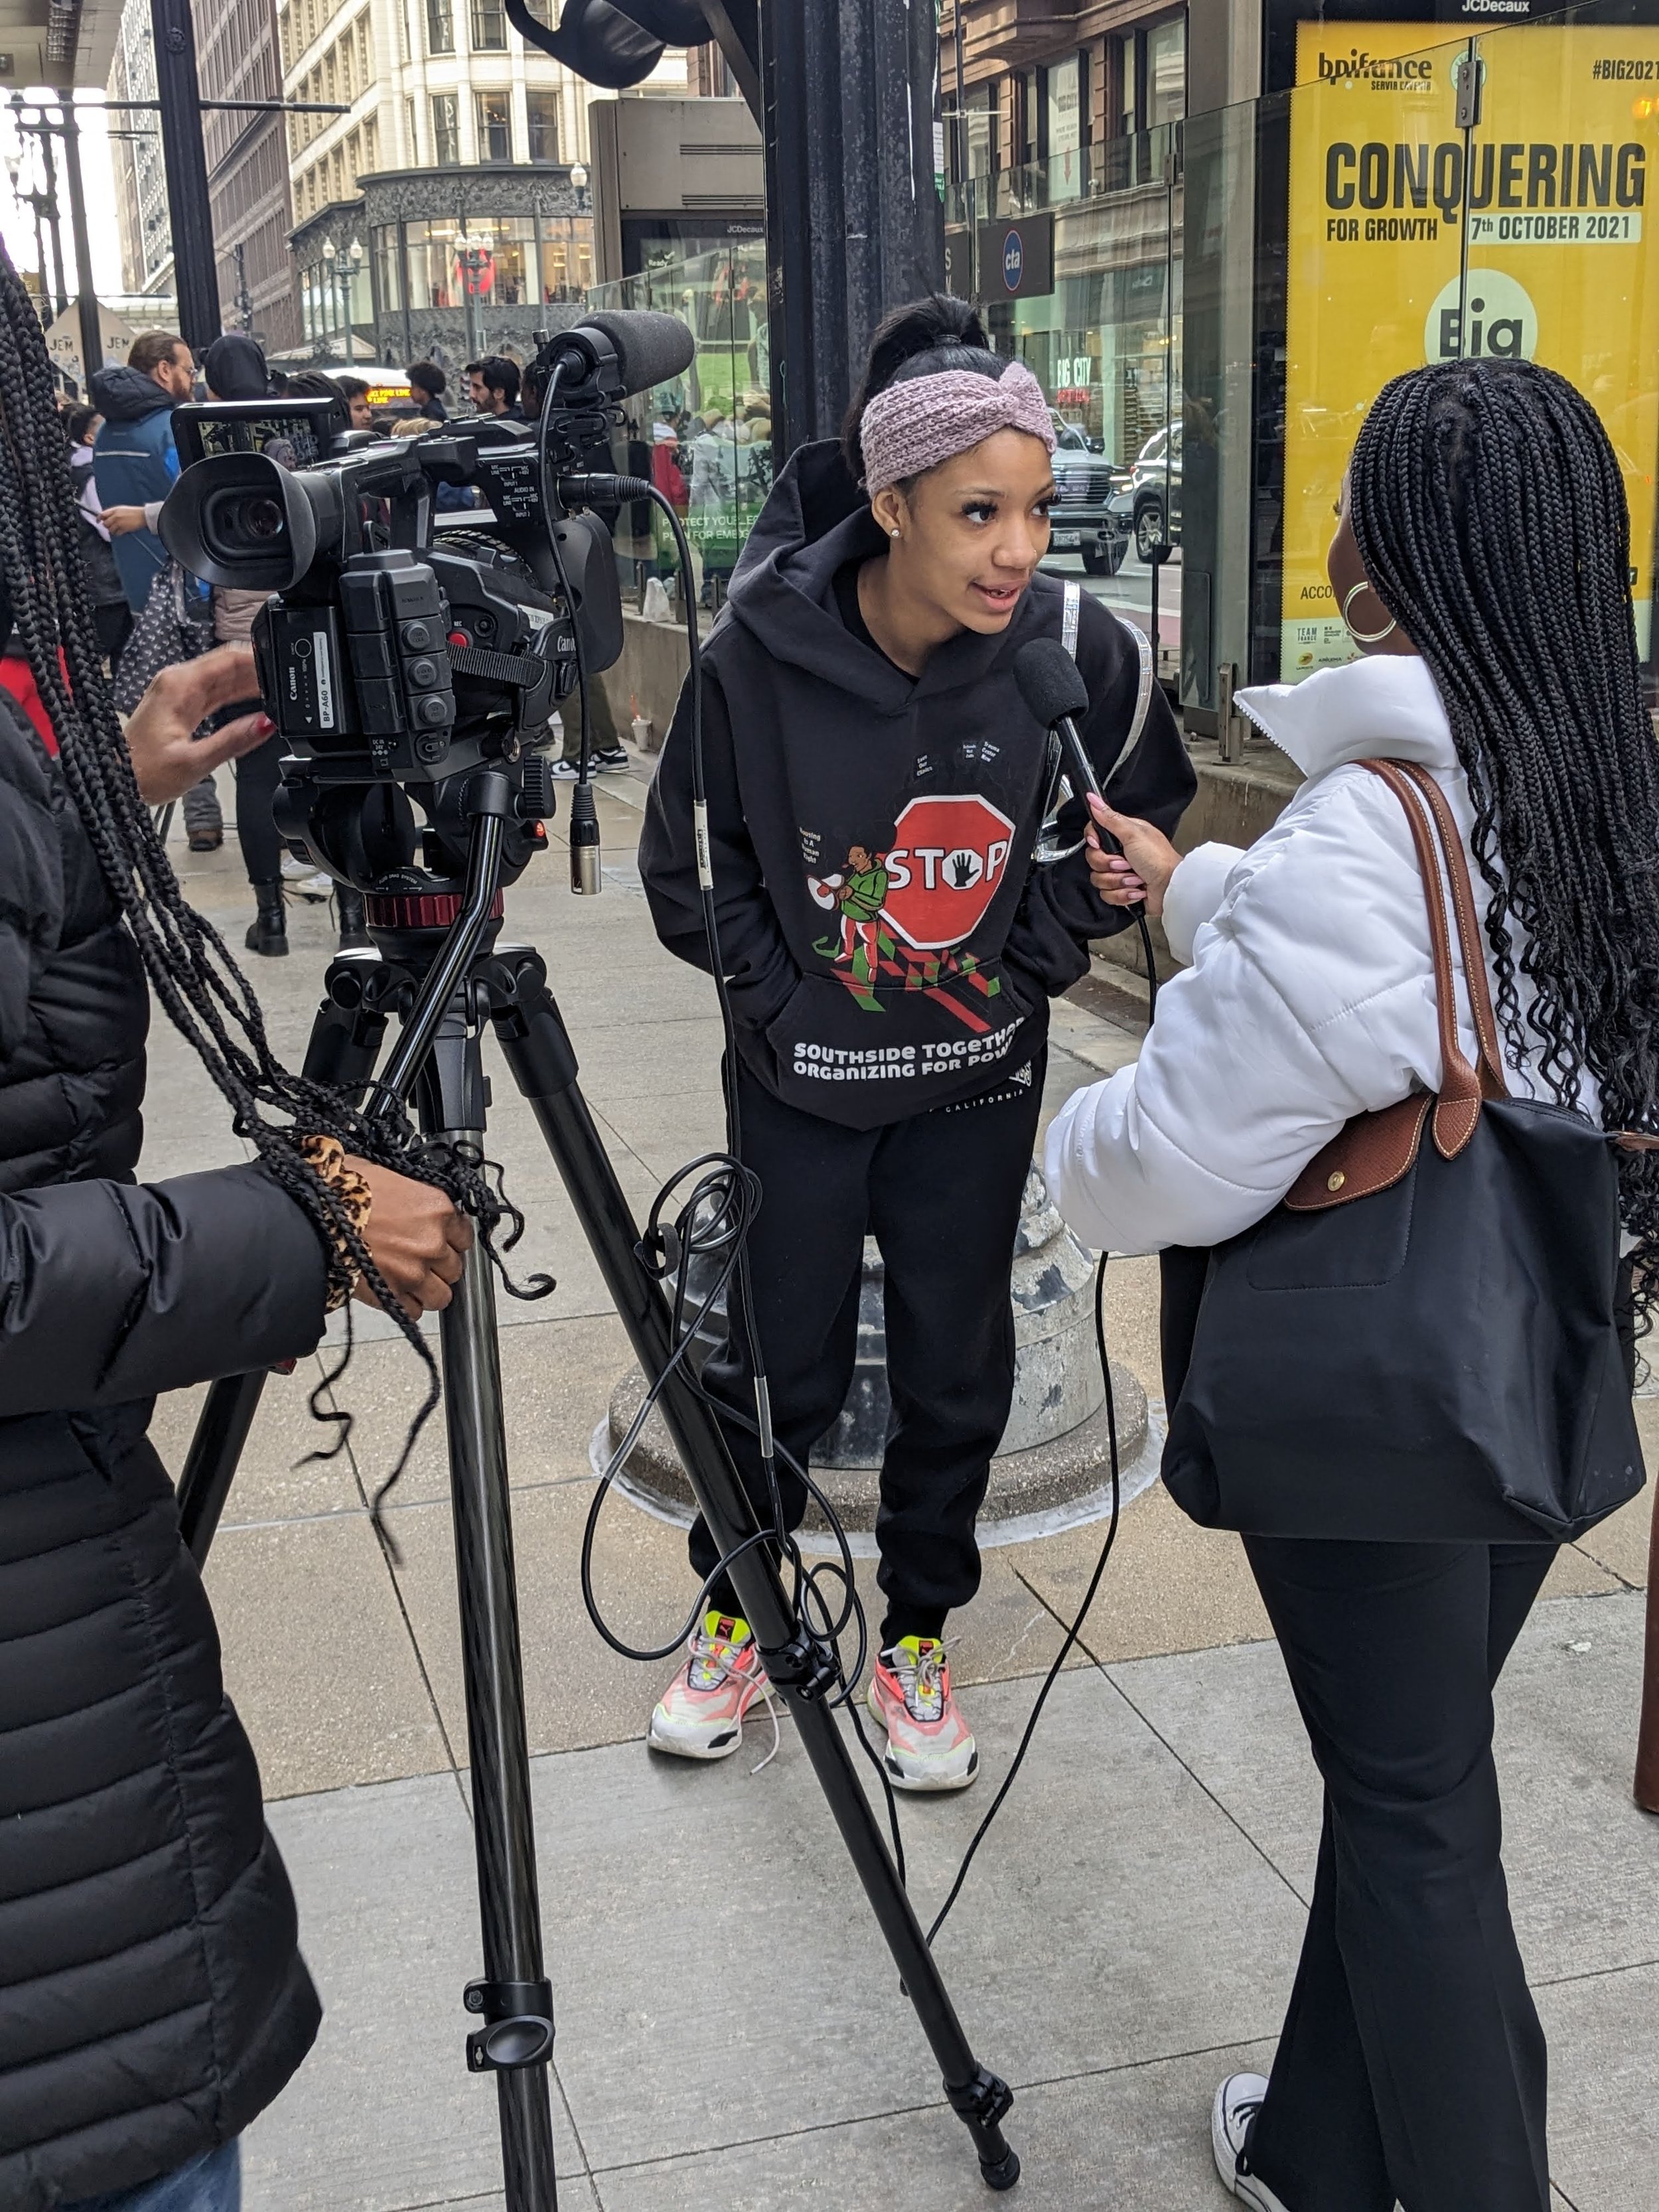   STOP youth member and Hyde Park Academy student Camaya Tate speaks to the news media  